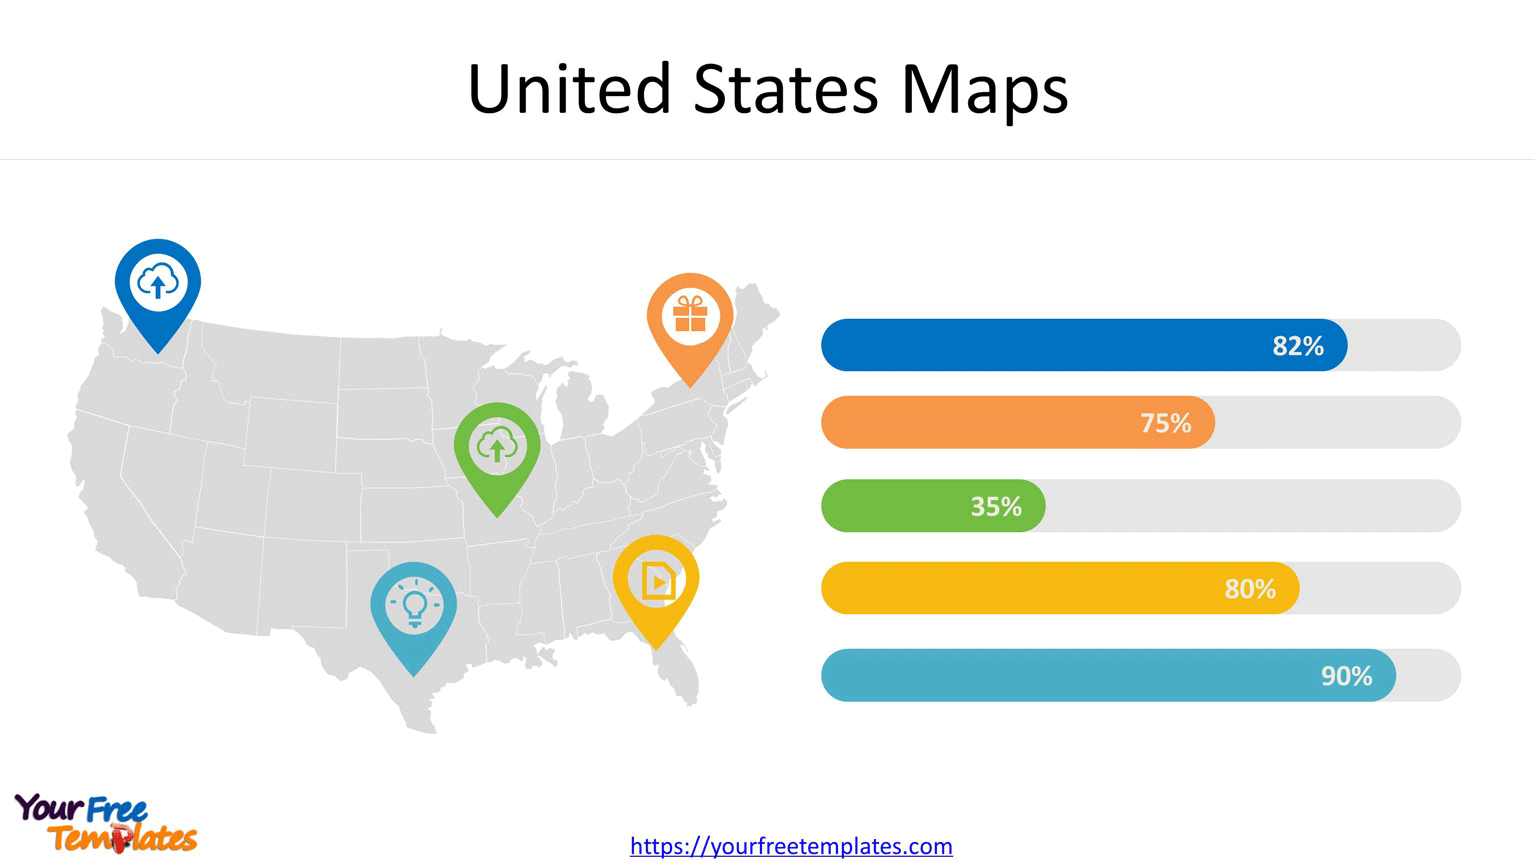 United States Map infographic